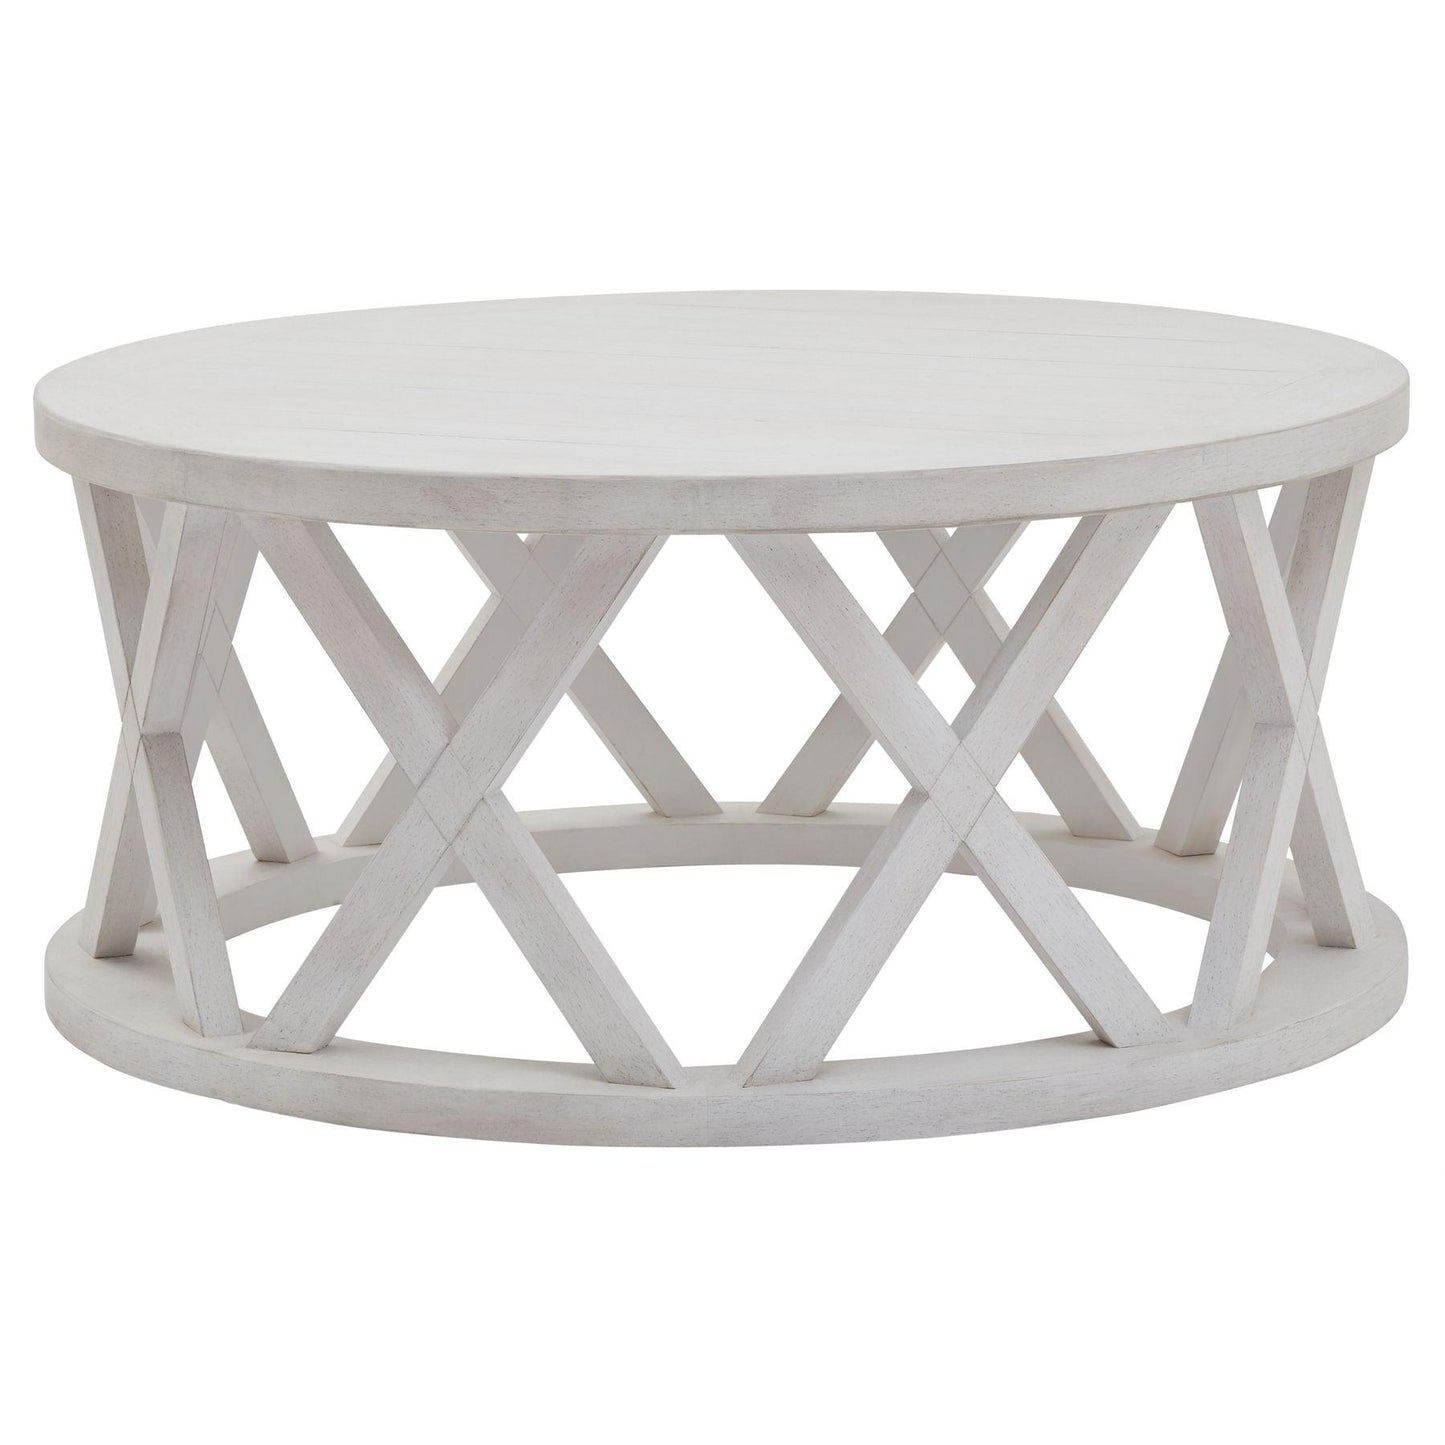 Stamford Plank Collection Round Coffee Table - Abode Decor